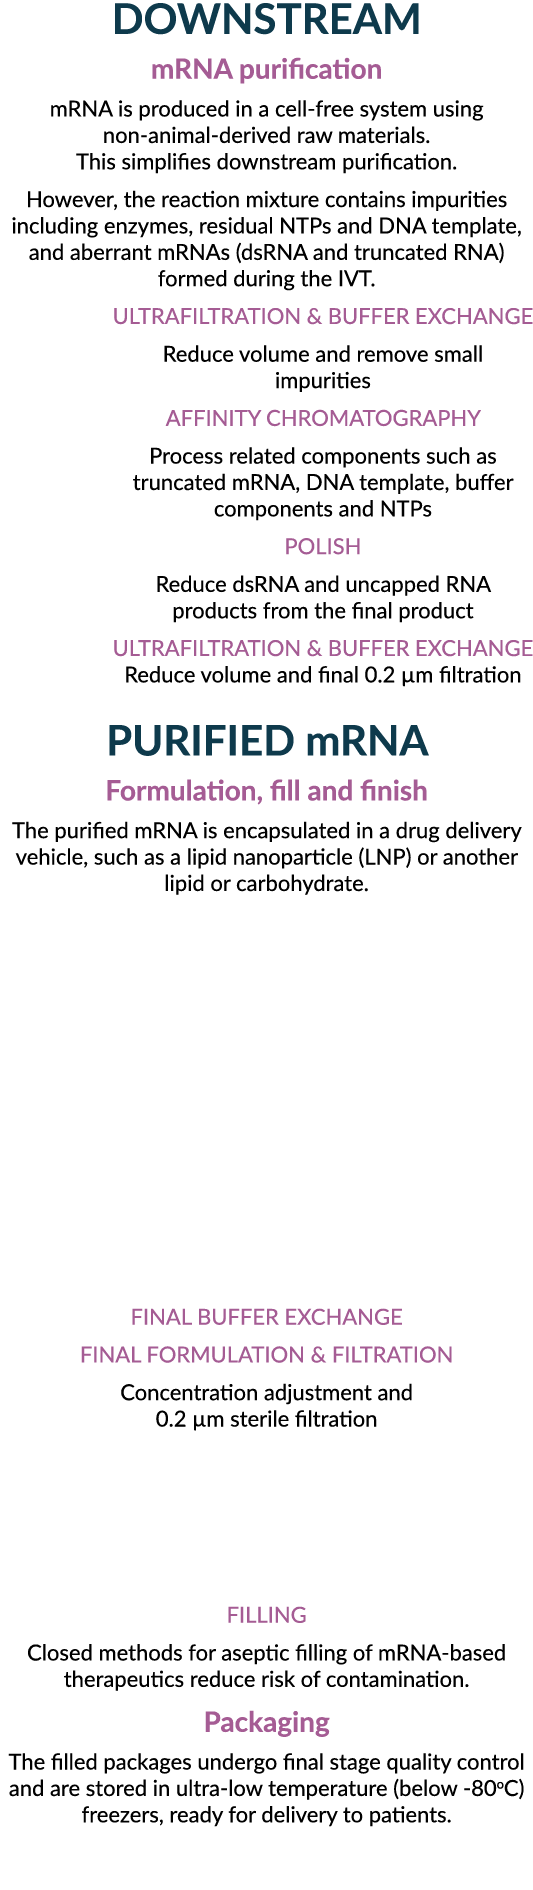 DOWNSTREAM mRNA purification mRNA is produced in a cell free system using non animal derived raw materials. This simp...